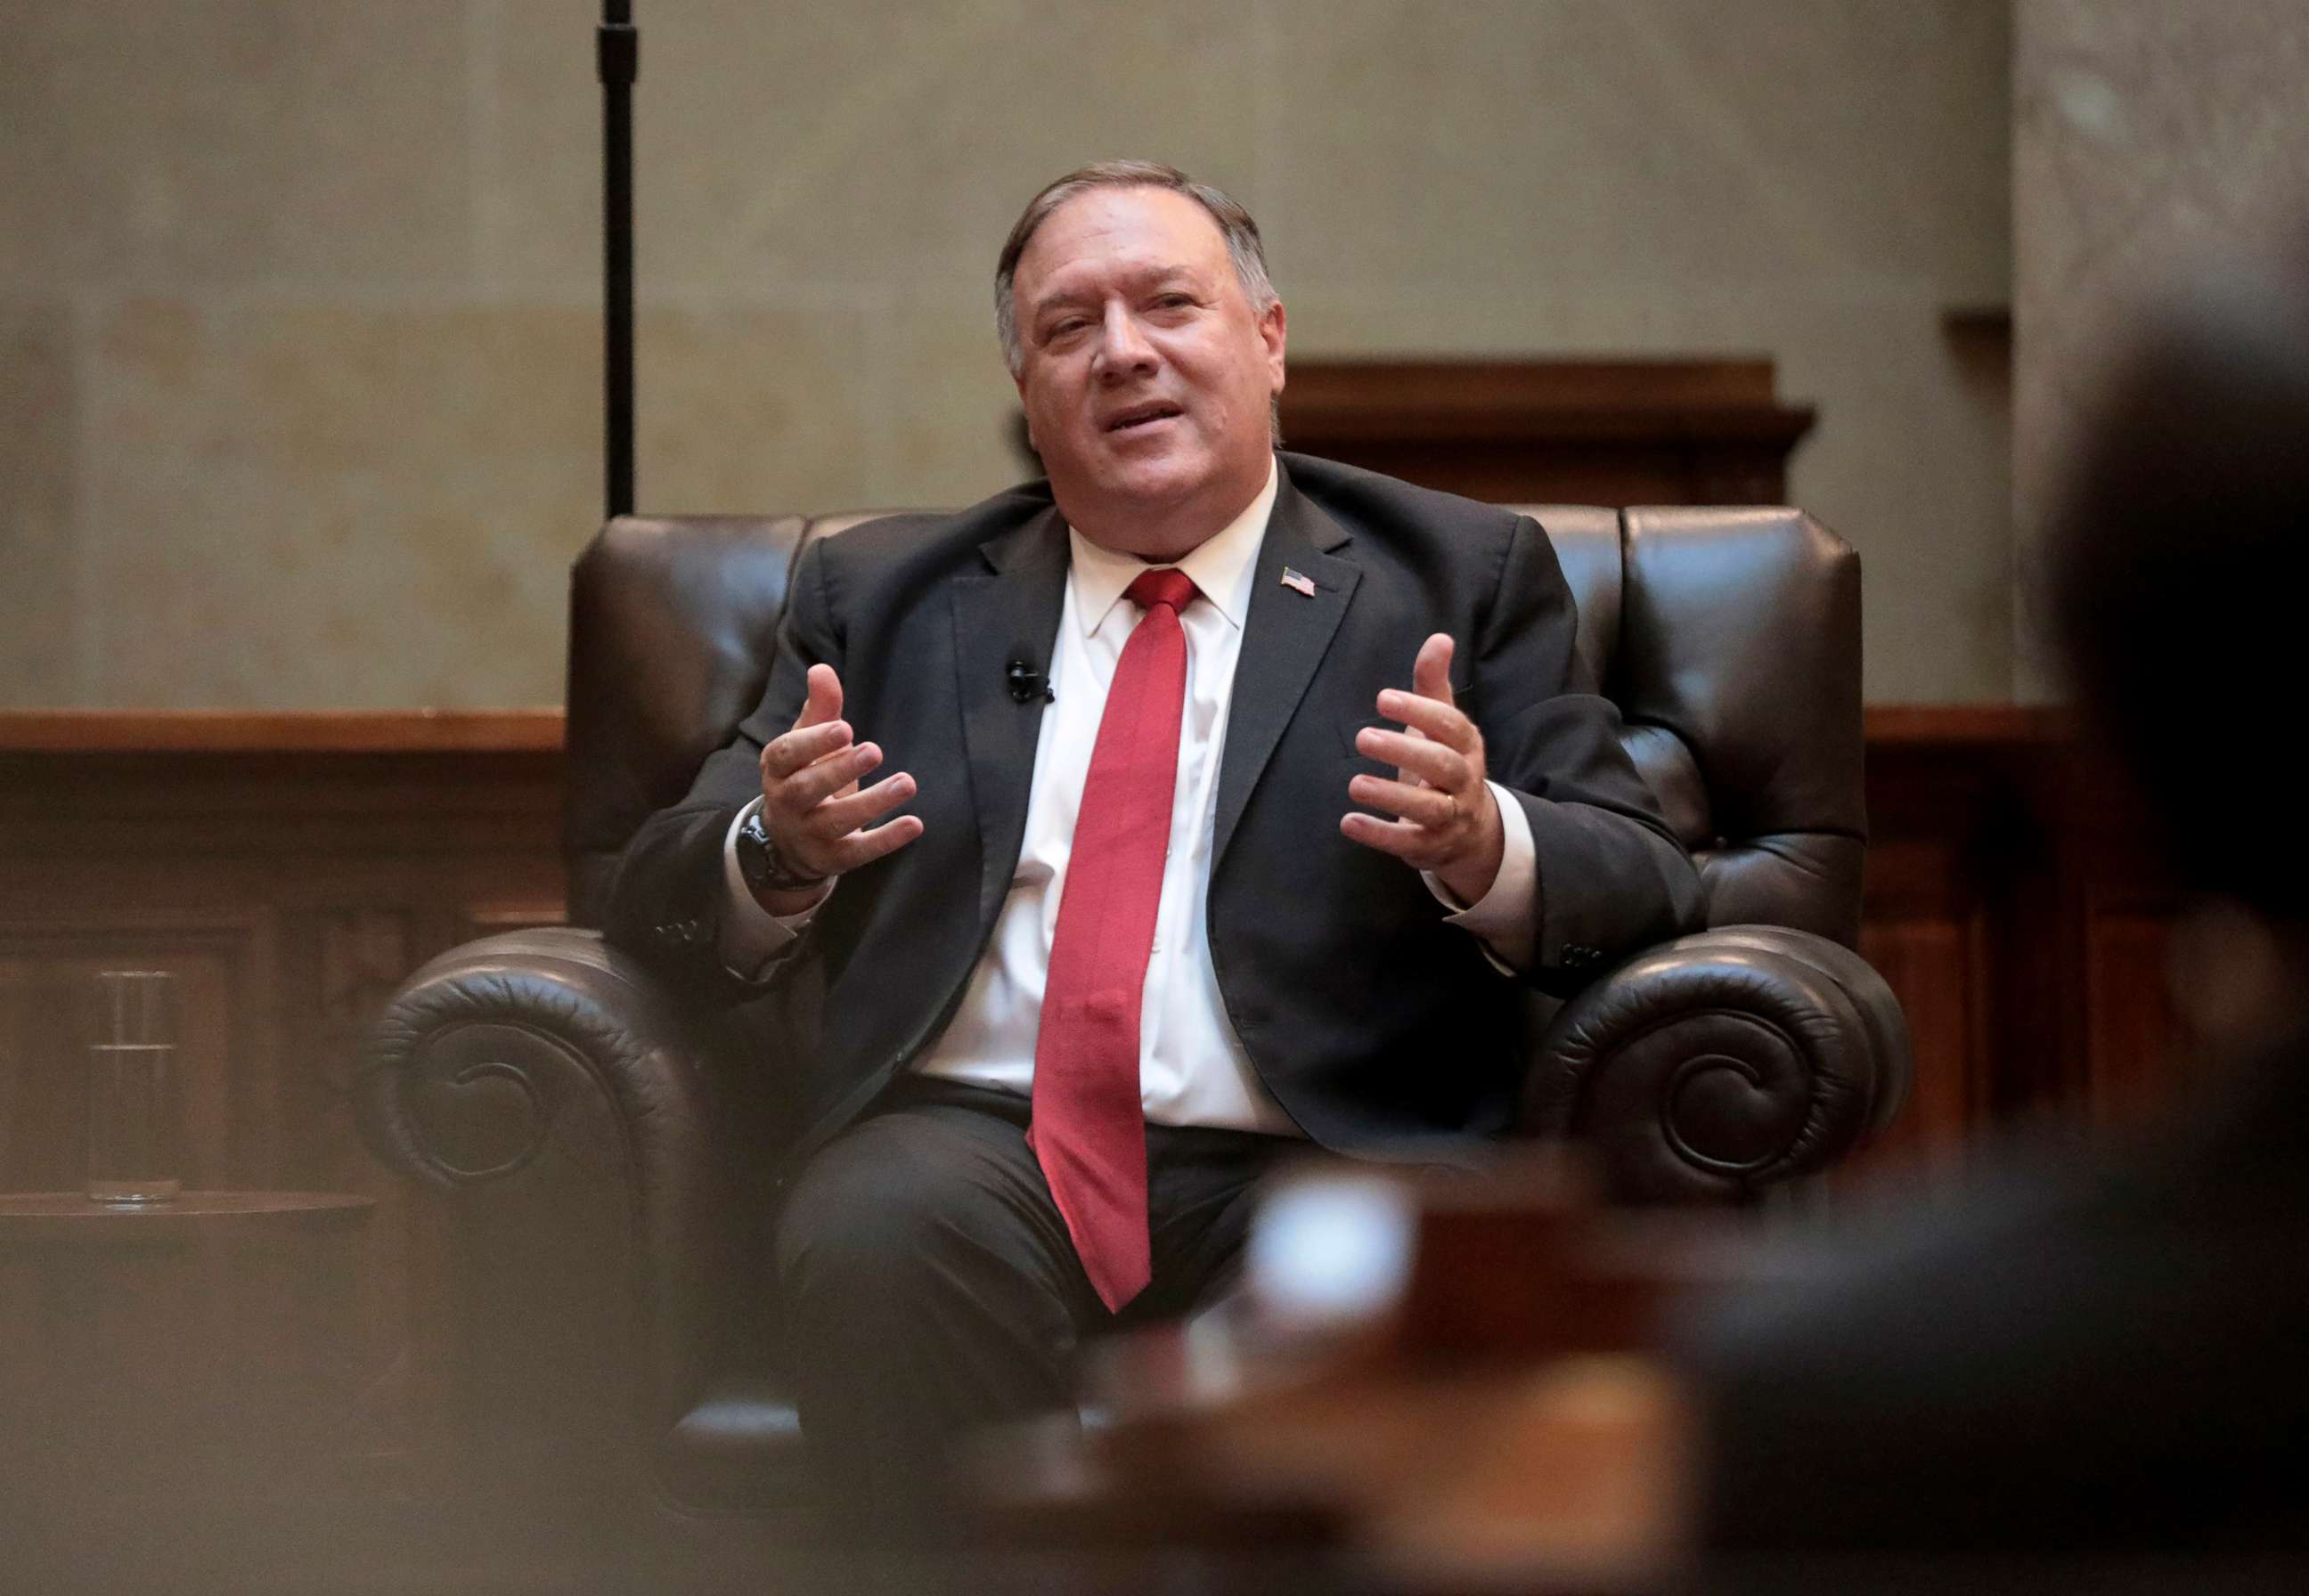 PHOTO: Secretary of State Mike Pompeo speaks during a question and answer session with state Republican legislators in the Senate chamber of the Wisconsin State Capitol in Madison, Wis. Sept. 23, 2020.